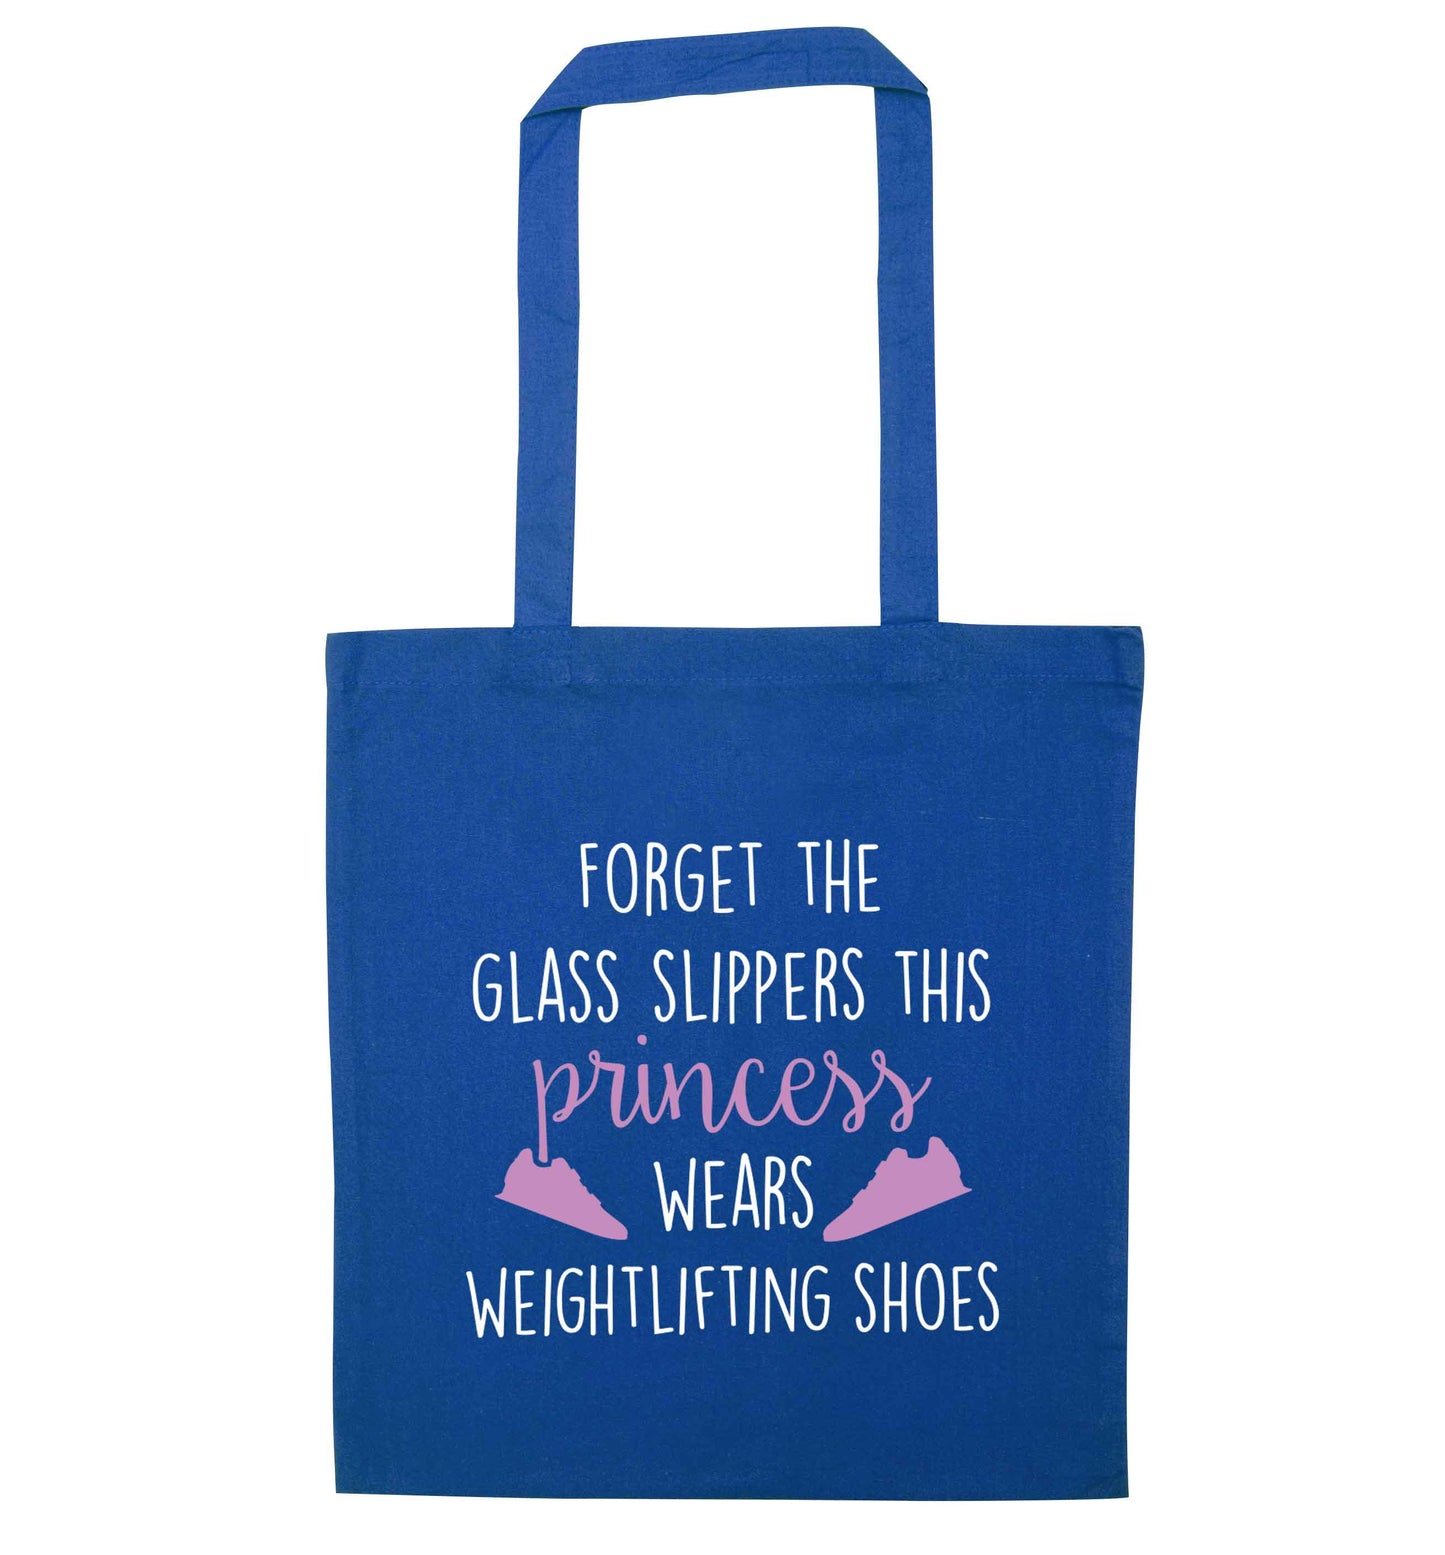 Forget the glass slippers this princess wears weightlifting shoes blue tote bag